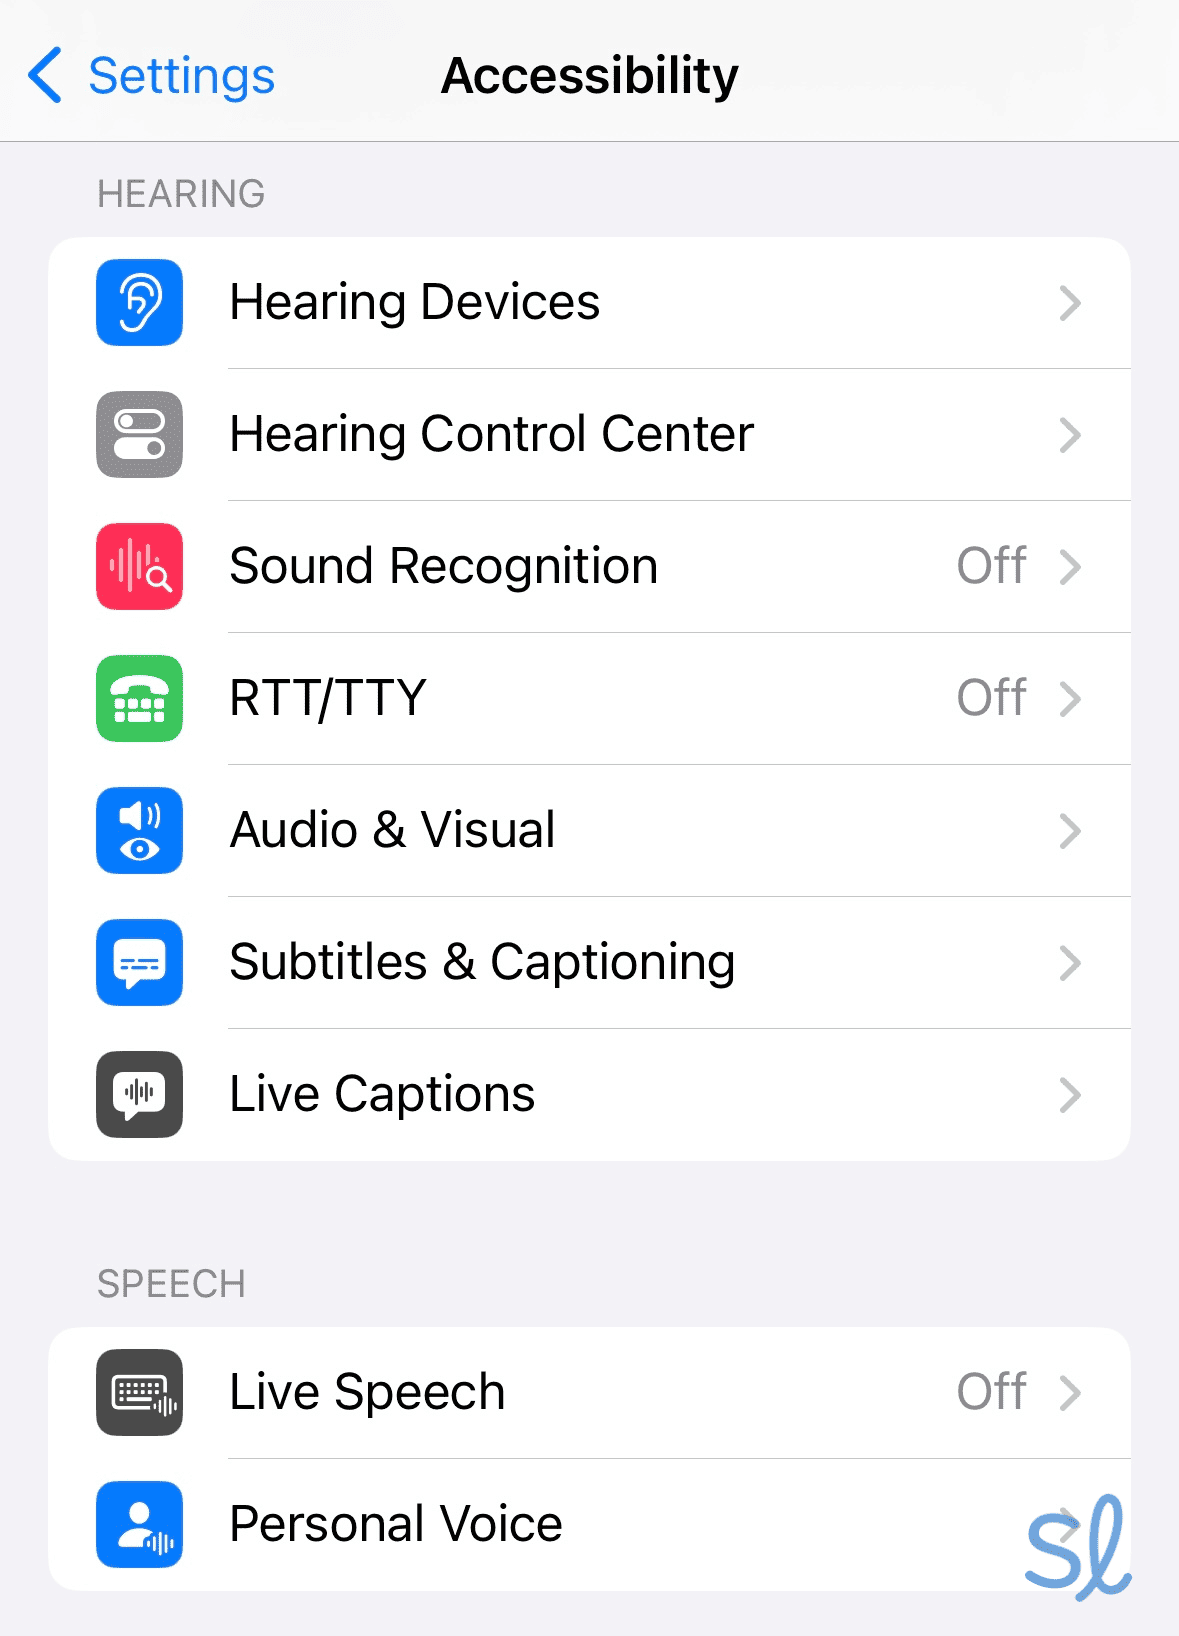 Using the iPhone's accessibility features for those with hearing impairments